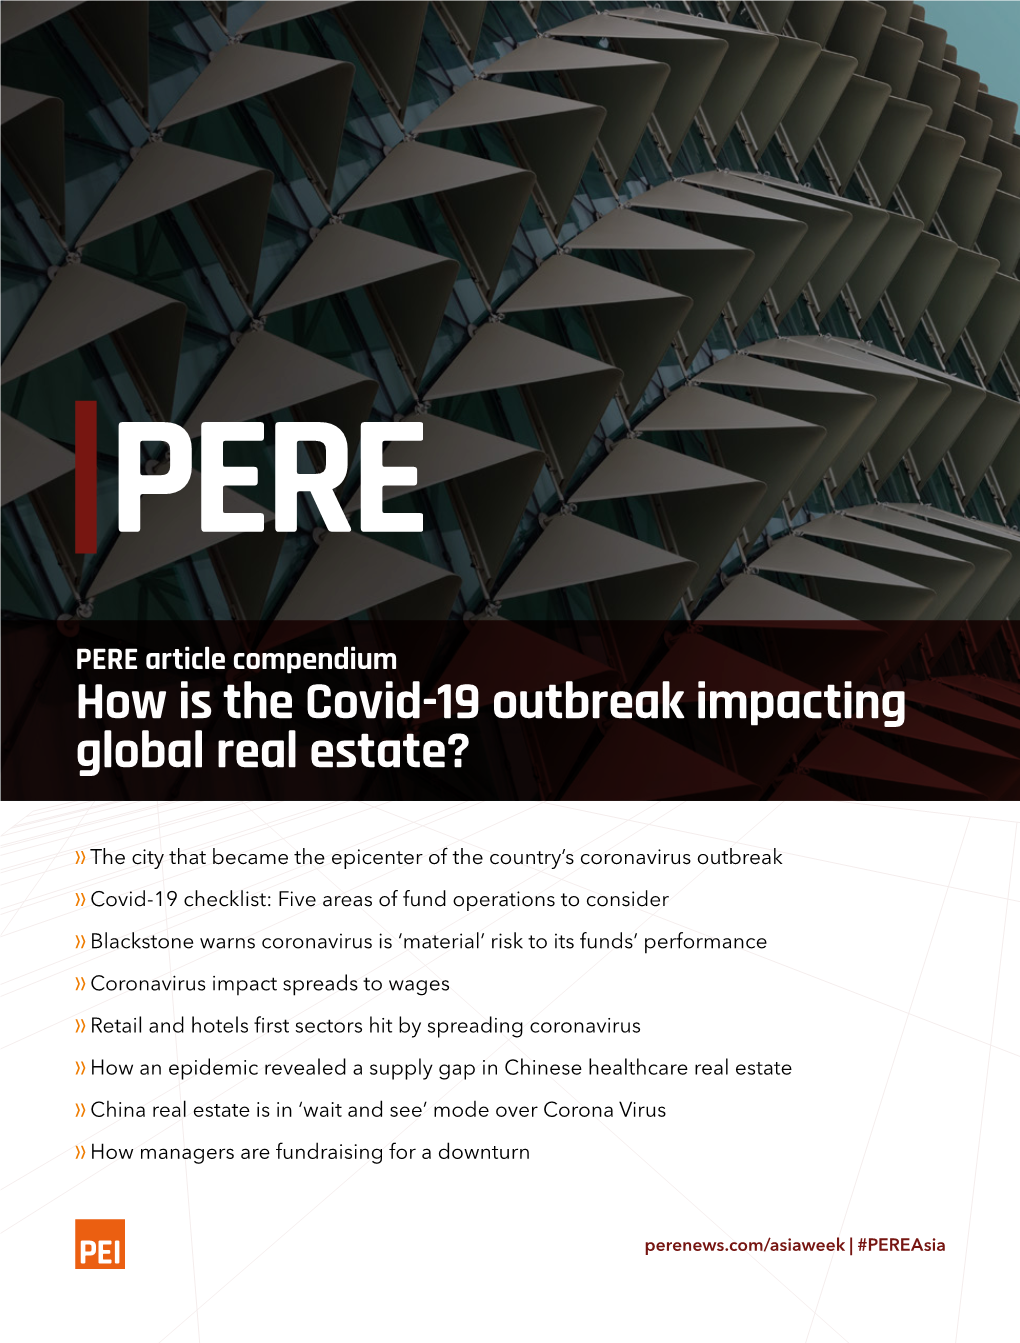 How Is the Covid-19 Outbreak Impacting Global Real Estate?